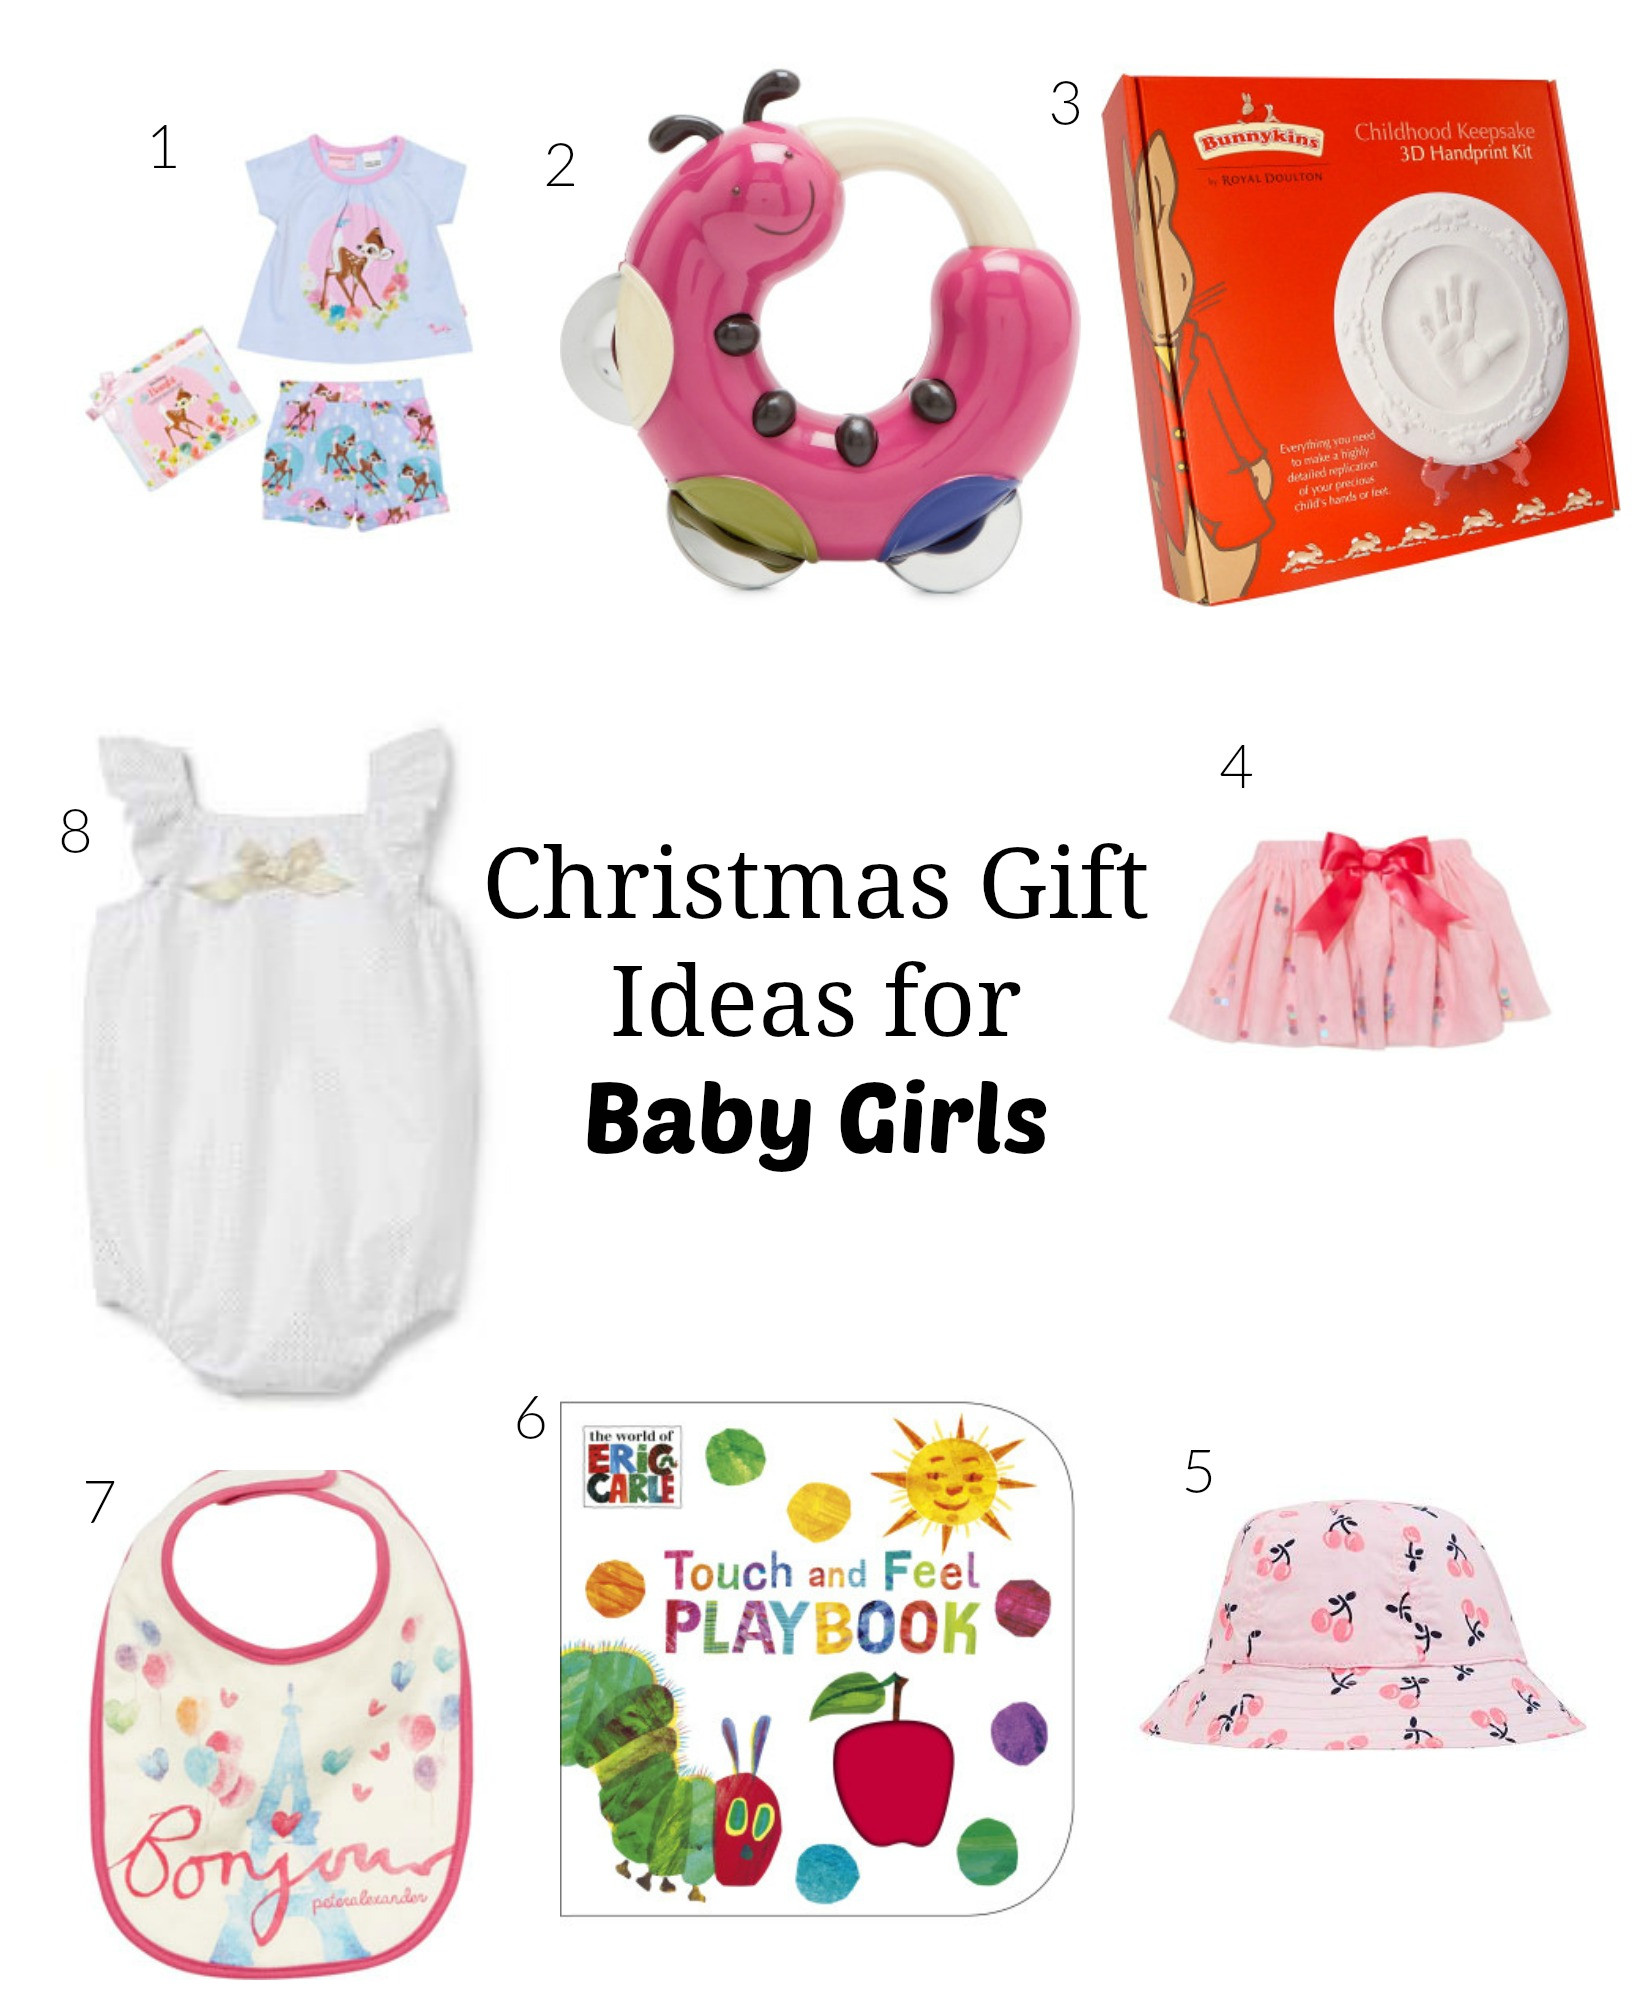 Baby Christmas Gift Ideas
 Go Ask Mum Christmas Gifts for Baby Girls Under $40 Go